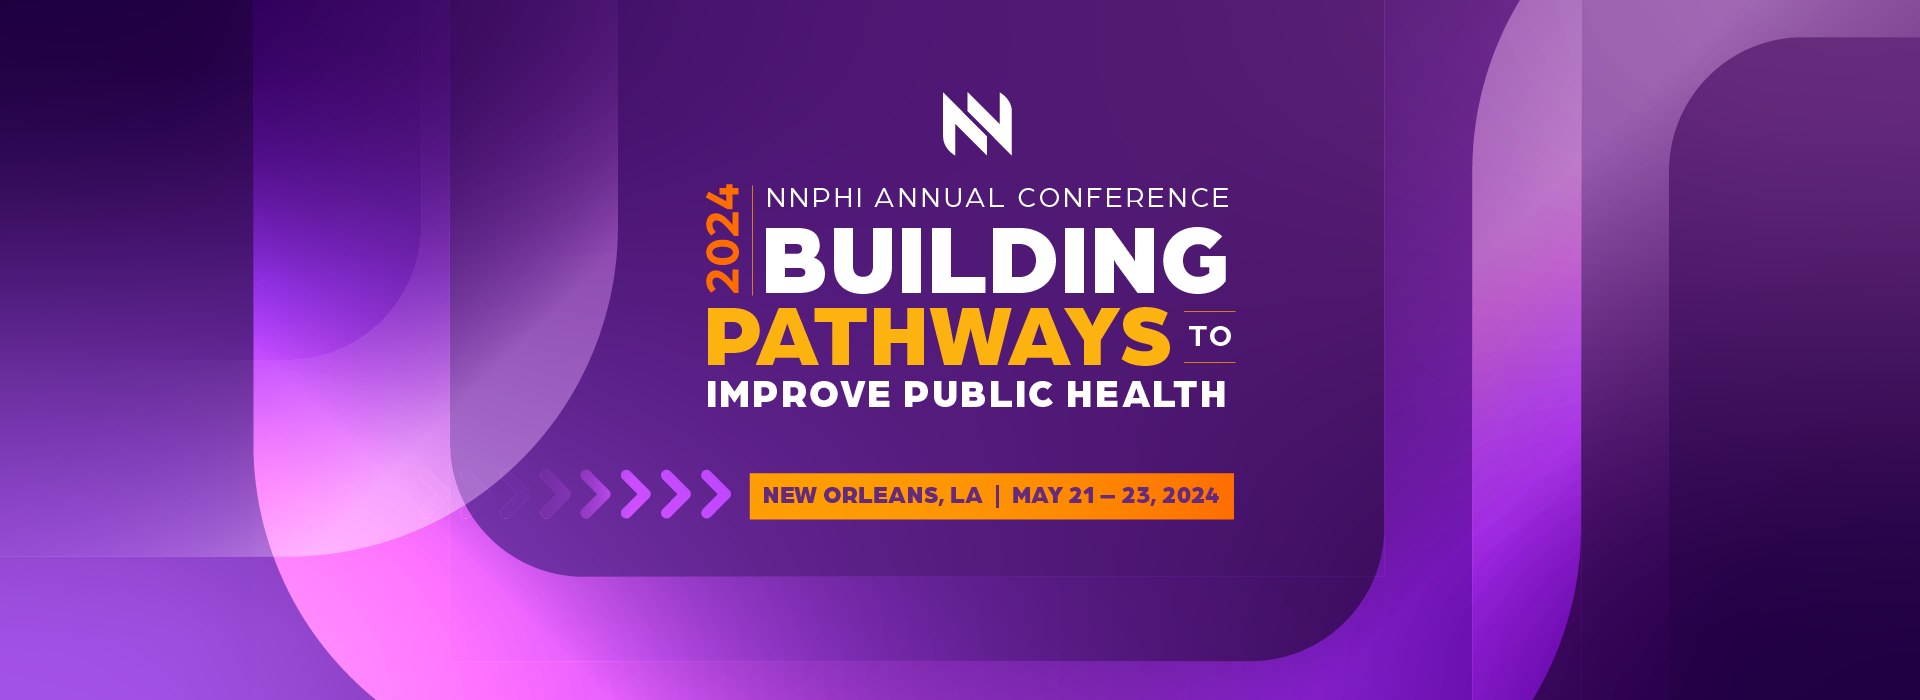 NNPHI Annual Conference 2024 NNPHI